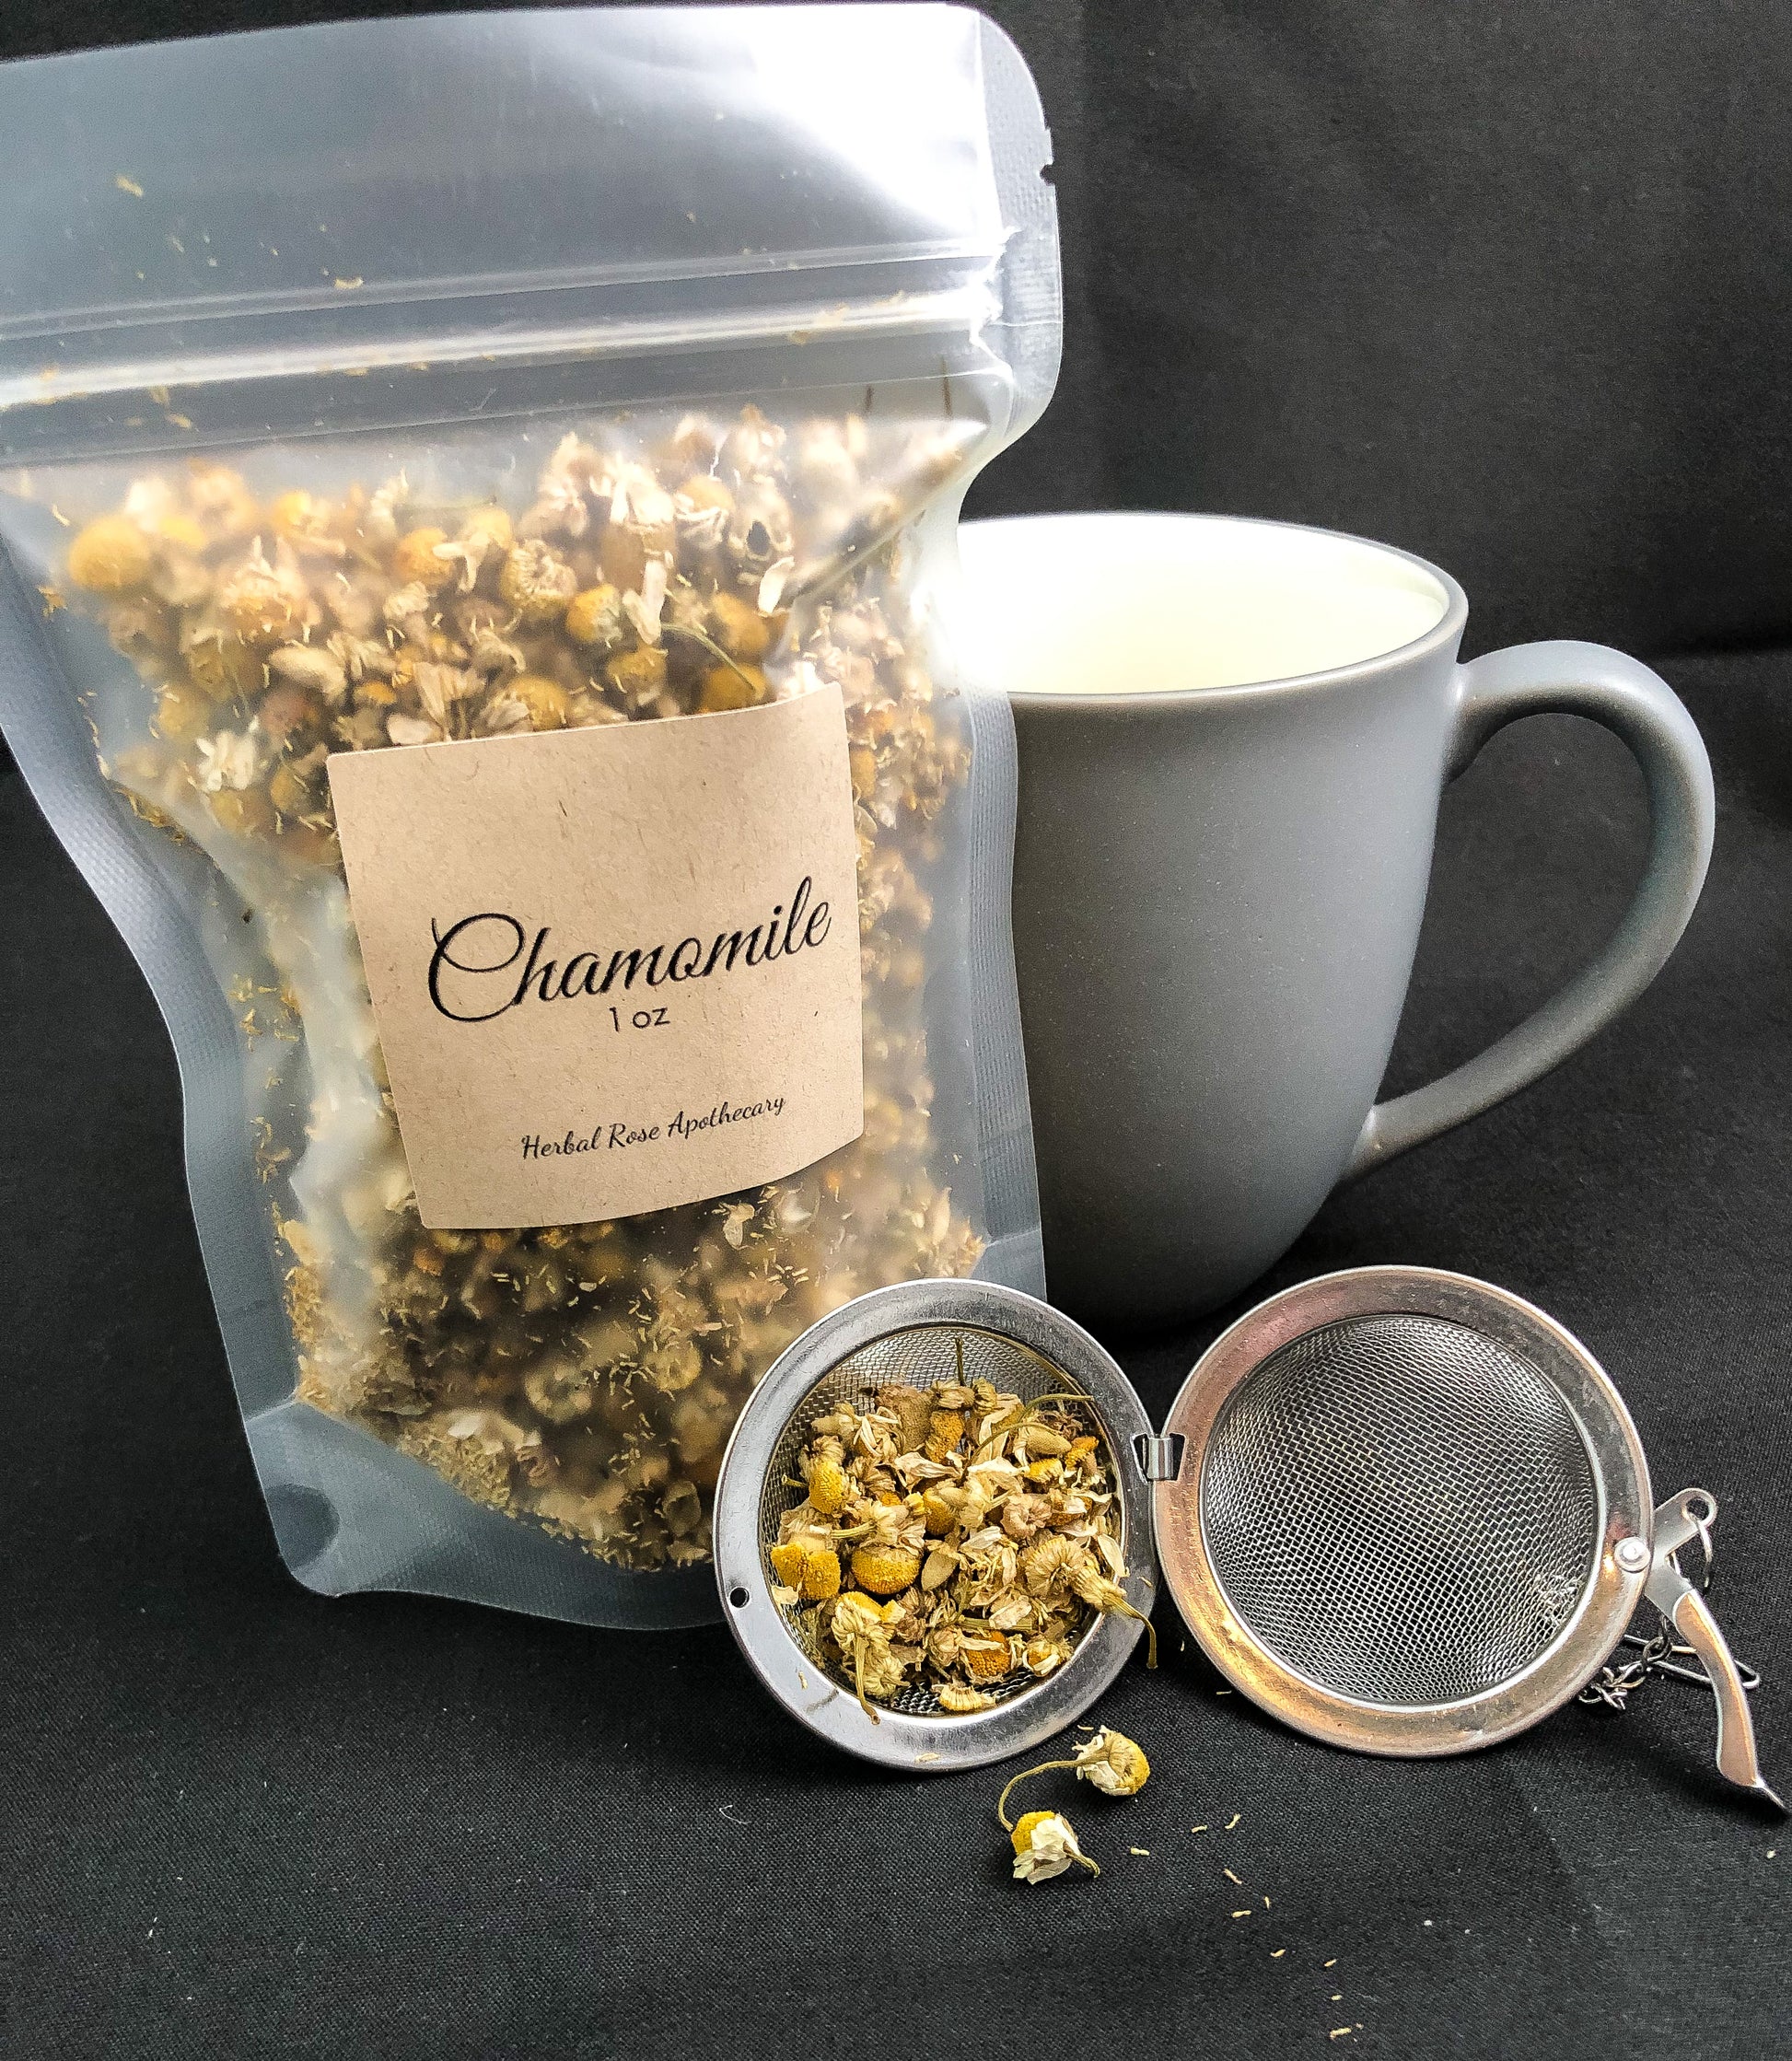 image of 1oz dried chamomile in clear plastic bag with a an open mesh tea strainer and chamomile inside and falling out, along with a grey mug next to bag and a black background